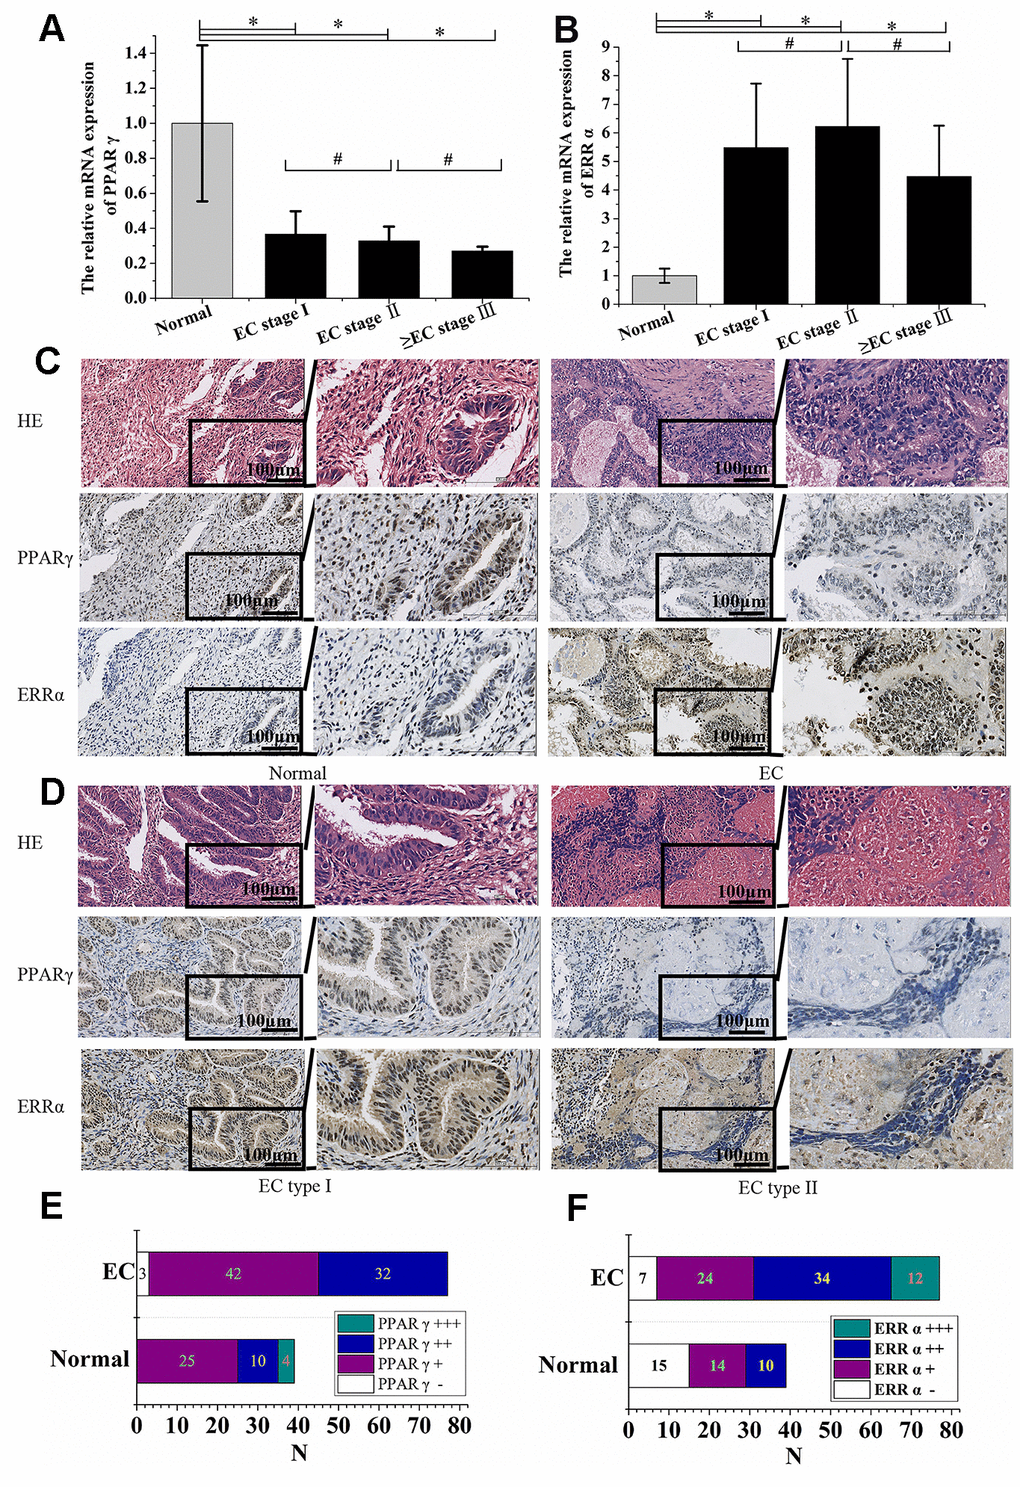 PPARγ was negatively correlated with ERRα in EC tissue. (A) The relative mRNA expression of PPARγ and (B) the relative mRNA expression of ERRα in EC patients with different FIGO stages. (C) Immunohistochemical expression of PPARγ and ERRα in the normal endometrium and EC (×200 & ×400). (D) Immunohistochemical expression of PPARγ and ERRα in EC type I and EC type II (×200 & ×400). (E) Immunohistochemical expression of PPARγ in the normal endometrium and EC. (F) Immunohistochemical expression of ERRα in the normal endometrium and EC. CON: normal endometrium. EC, endometrial cancer. *, P0.05.